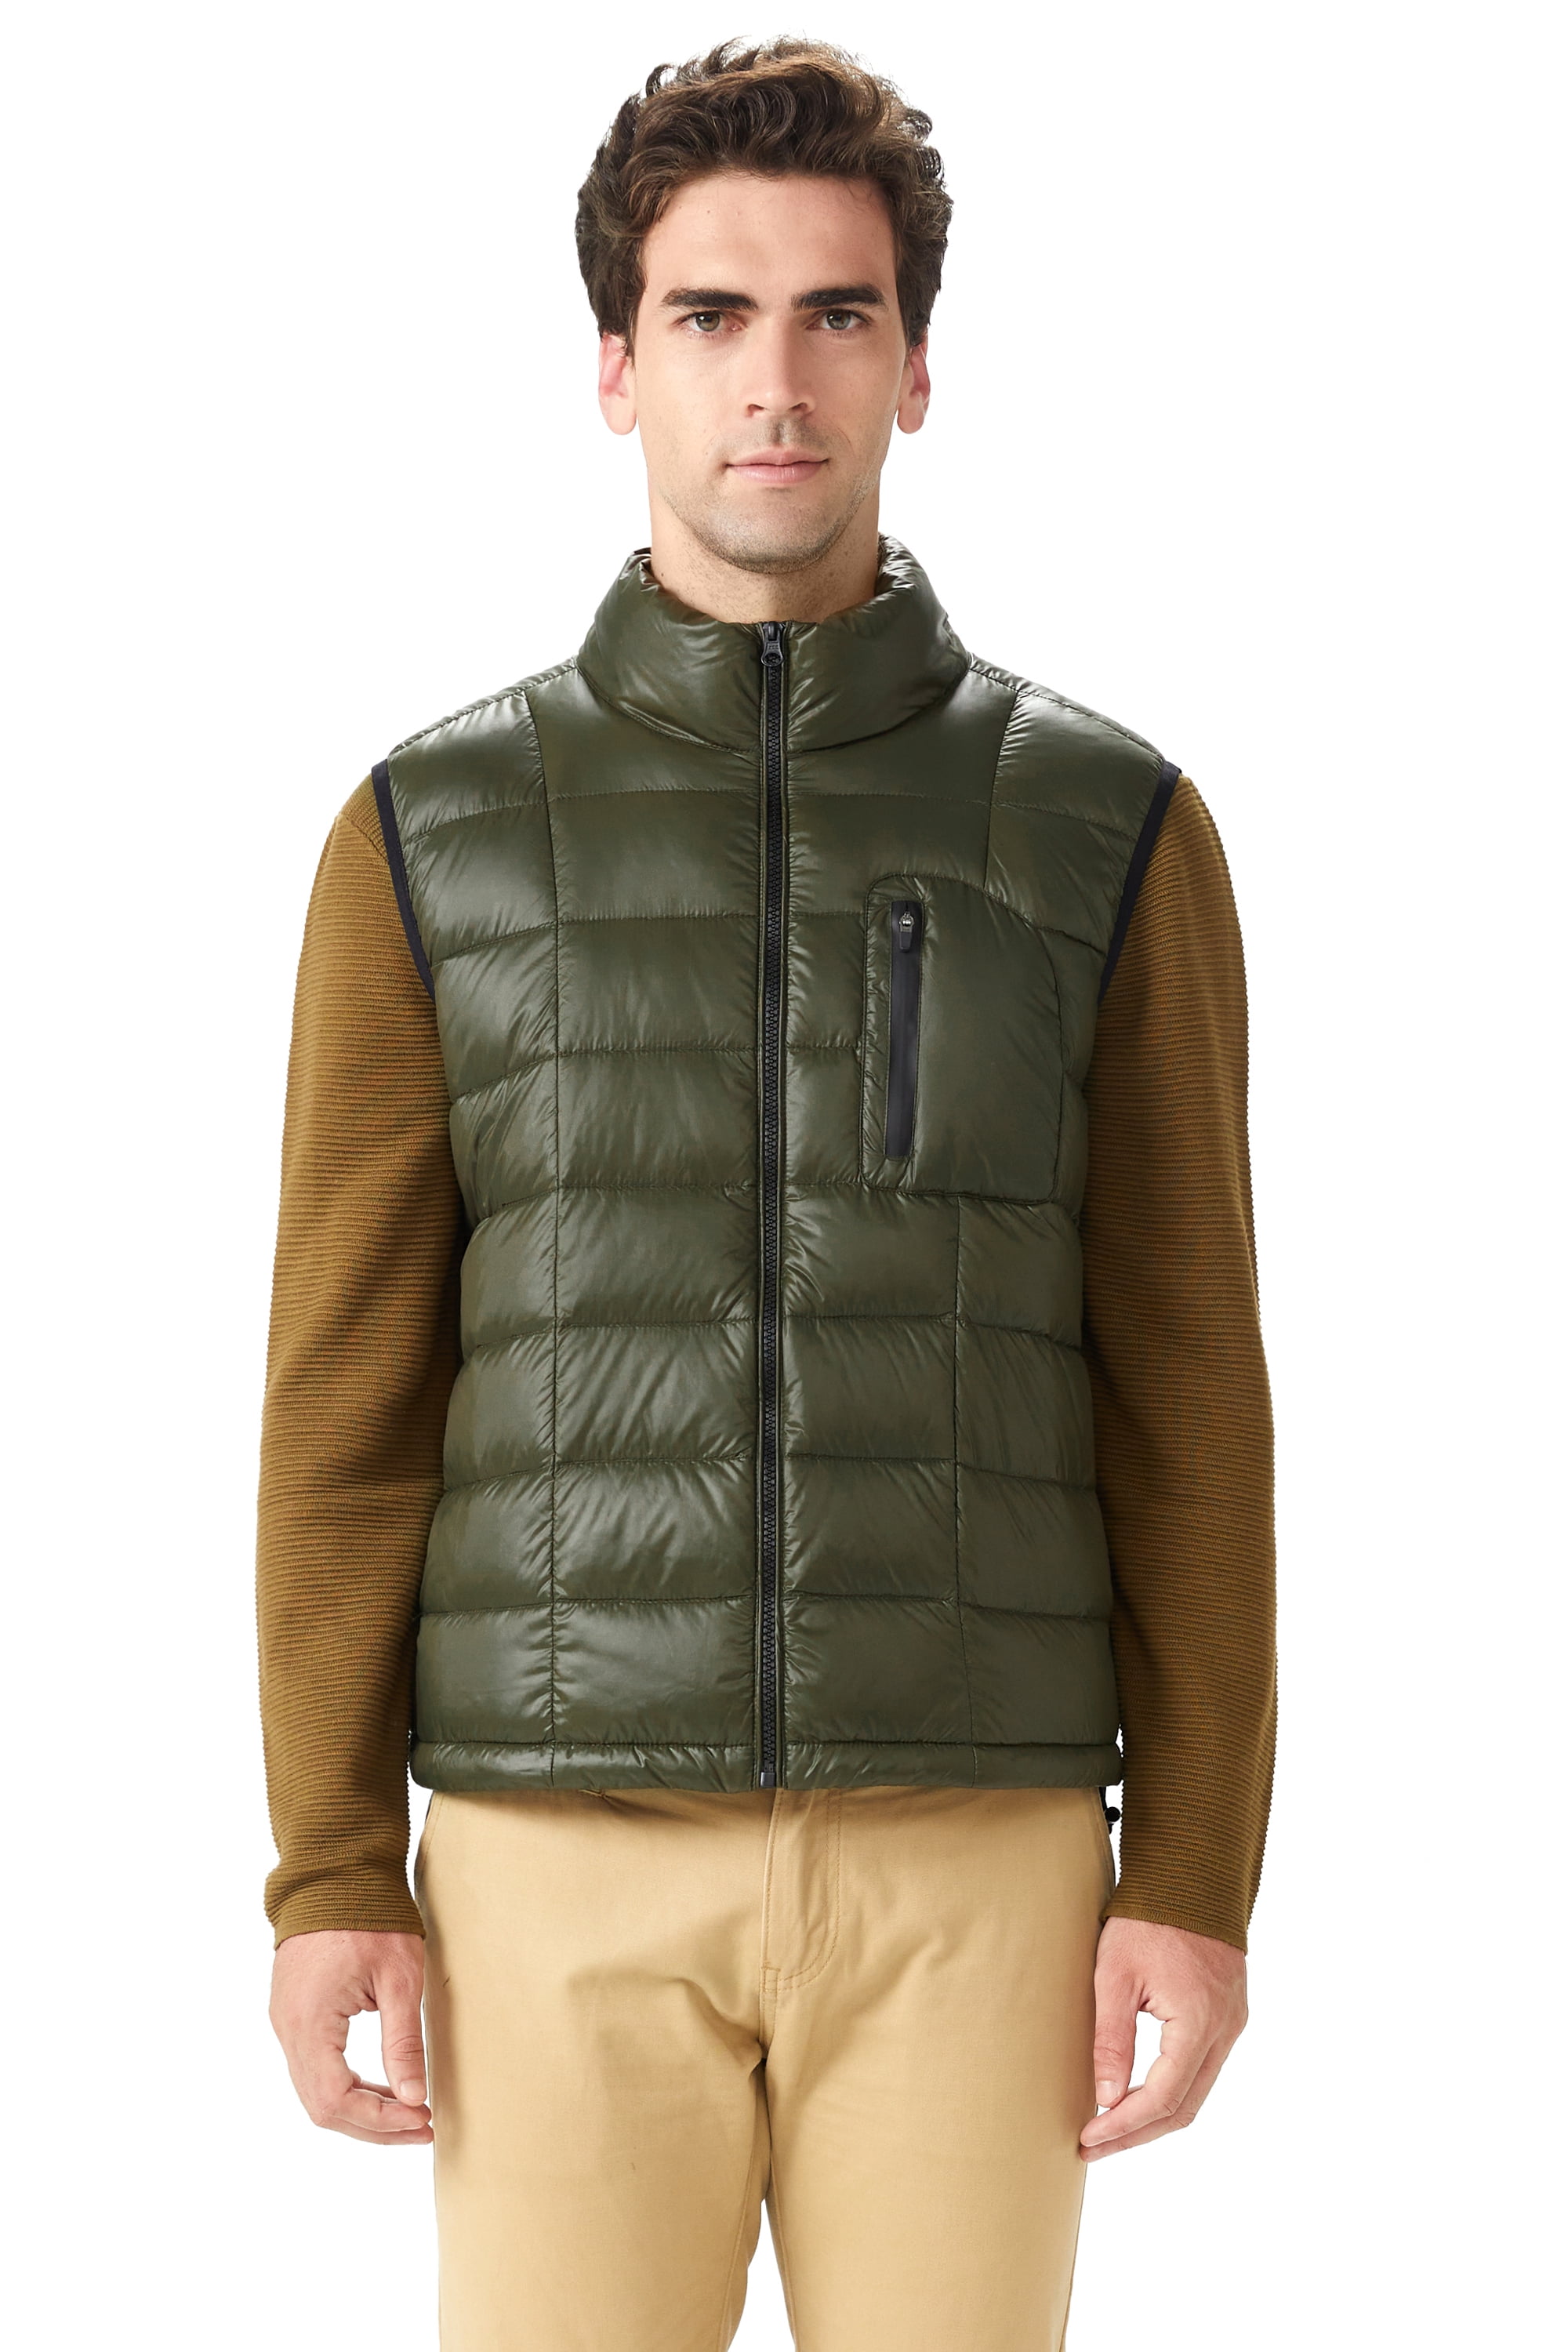 Orolay Men's Ultra Lightweight Down Vests Quilted Packable Winter Vest ...